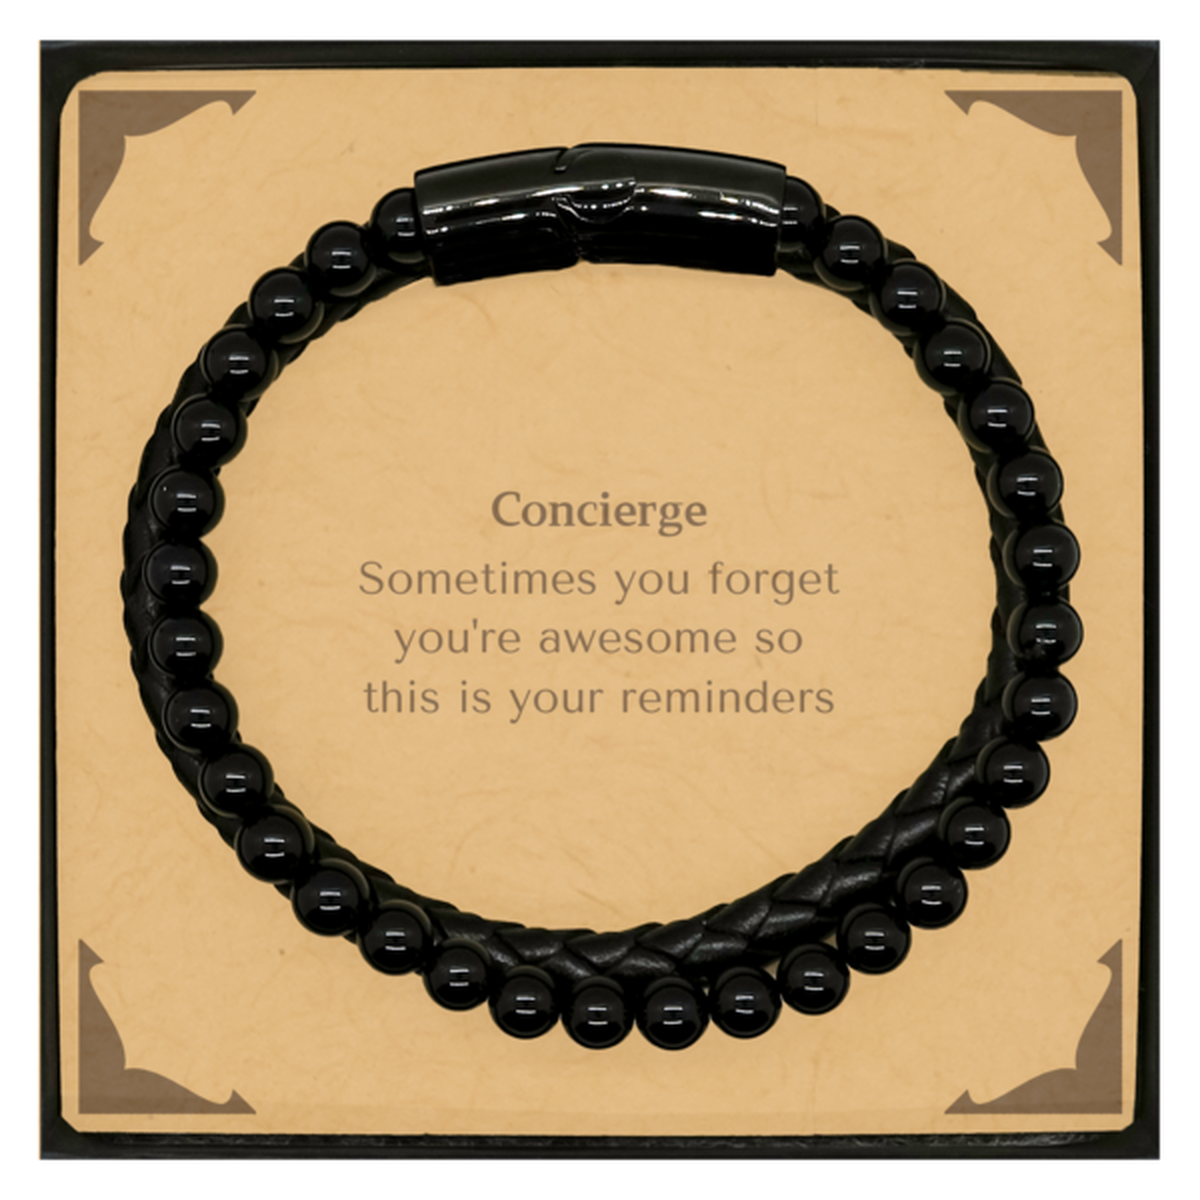 Sentimental Concierge Stone Leather Bracelets, Concierge Sometimes you forget you're awesome so this is your reminders, Graduation Christmas Birthday Gifts for Concierge, Men, Women, Coworkers